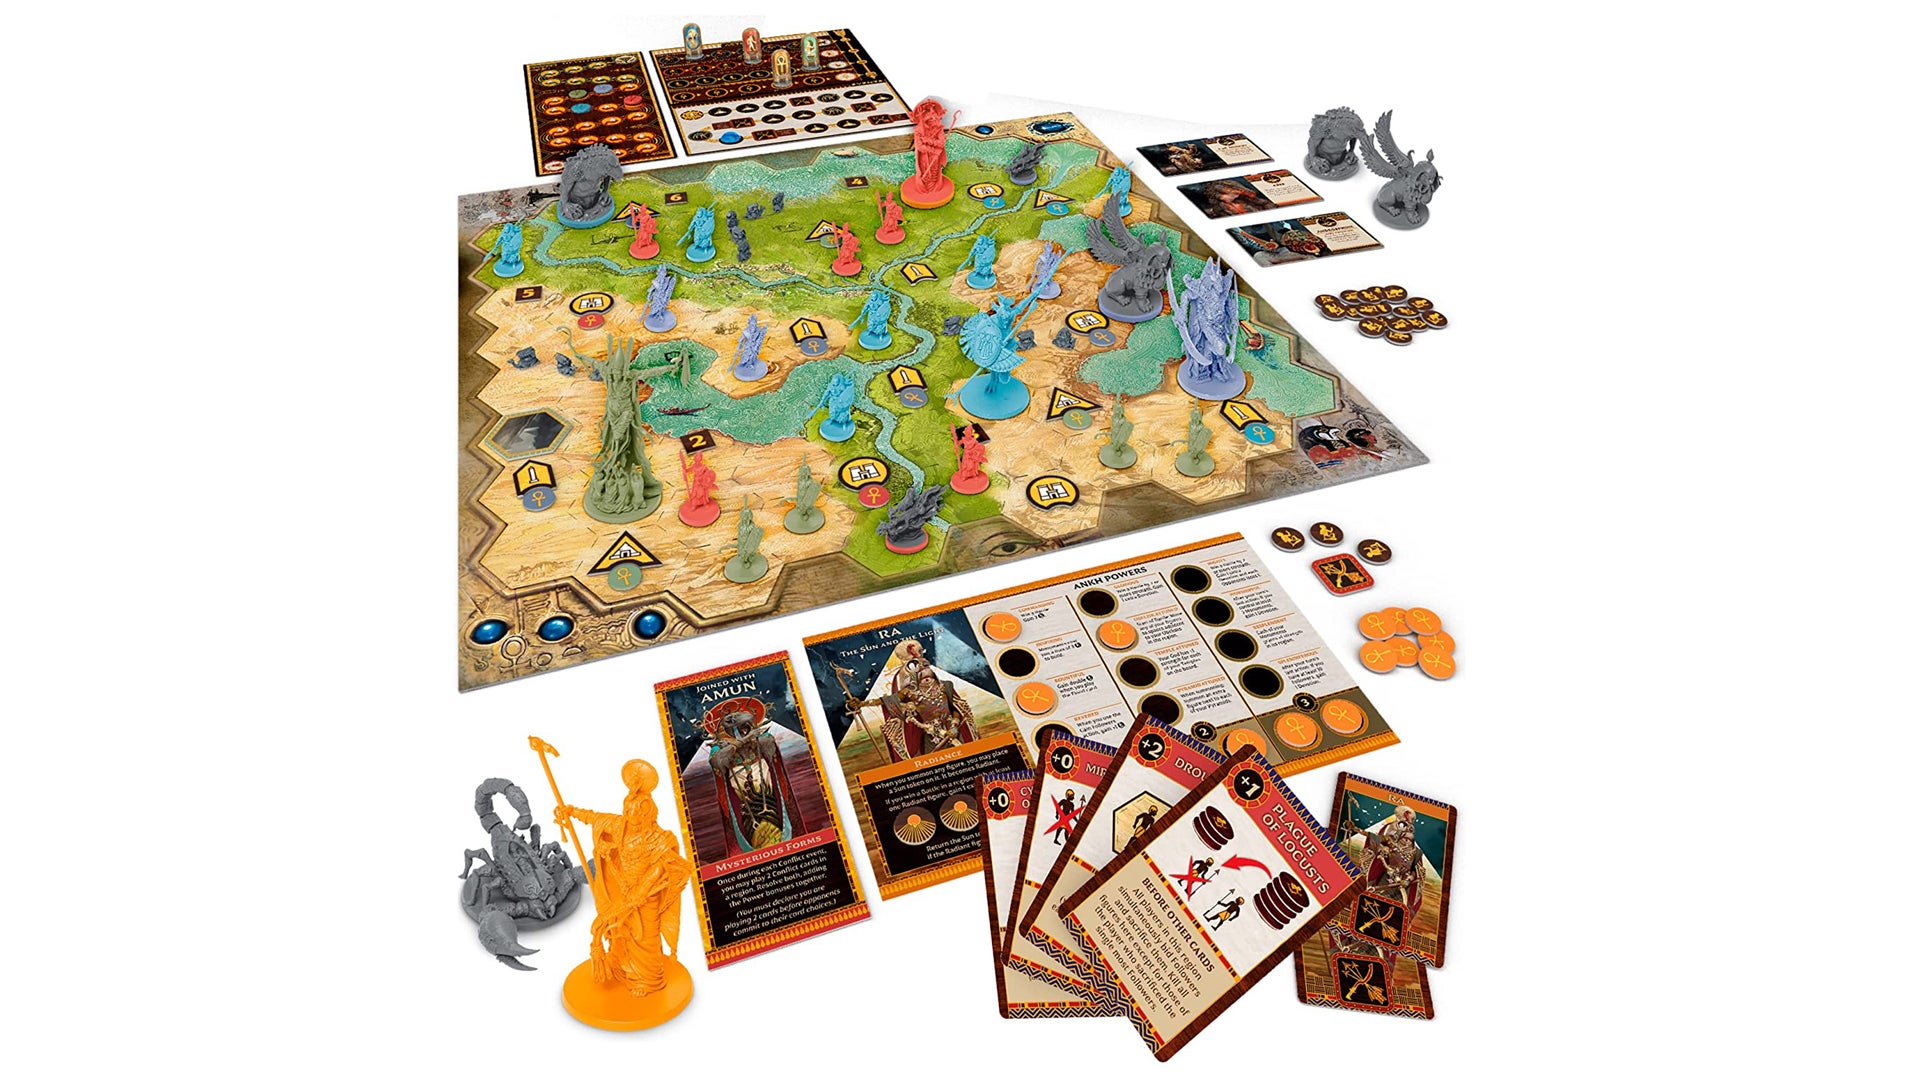 An image of the components for Ankh: Gods of Egypt.